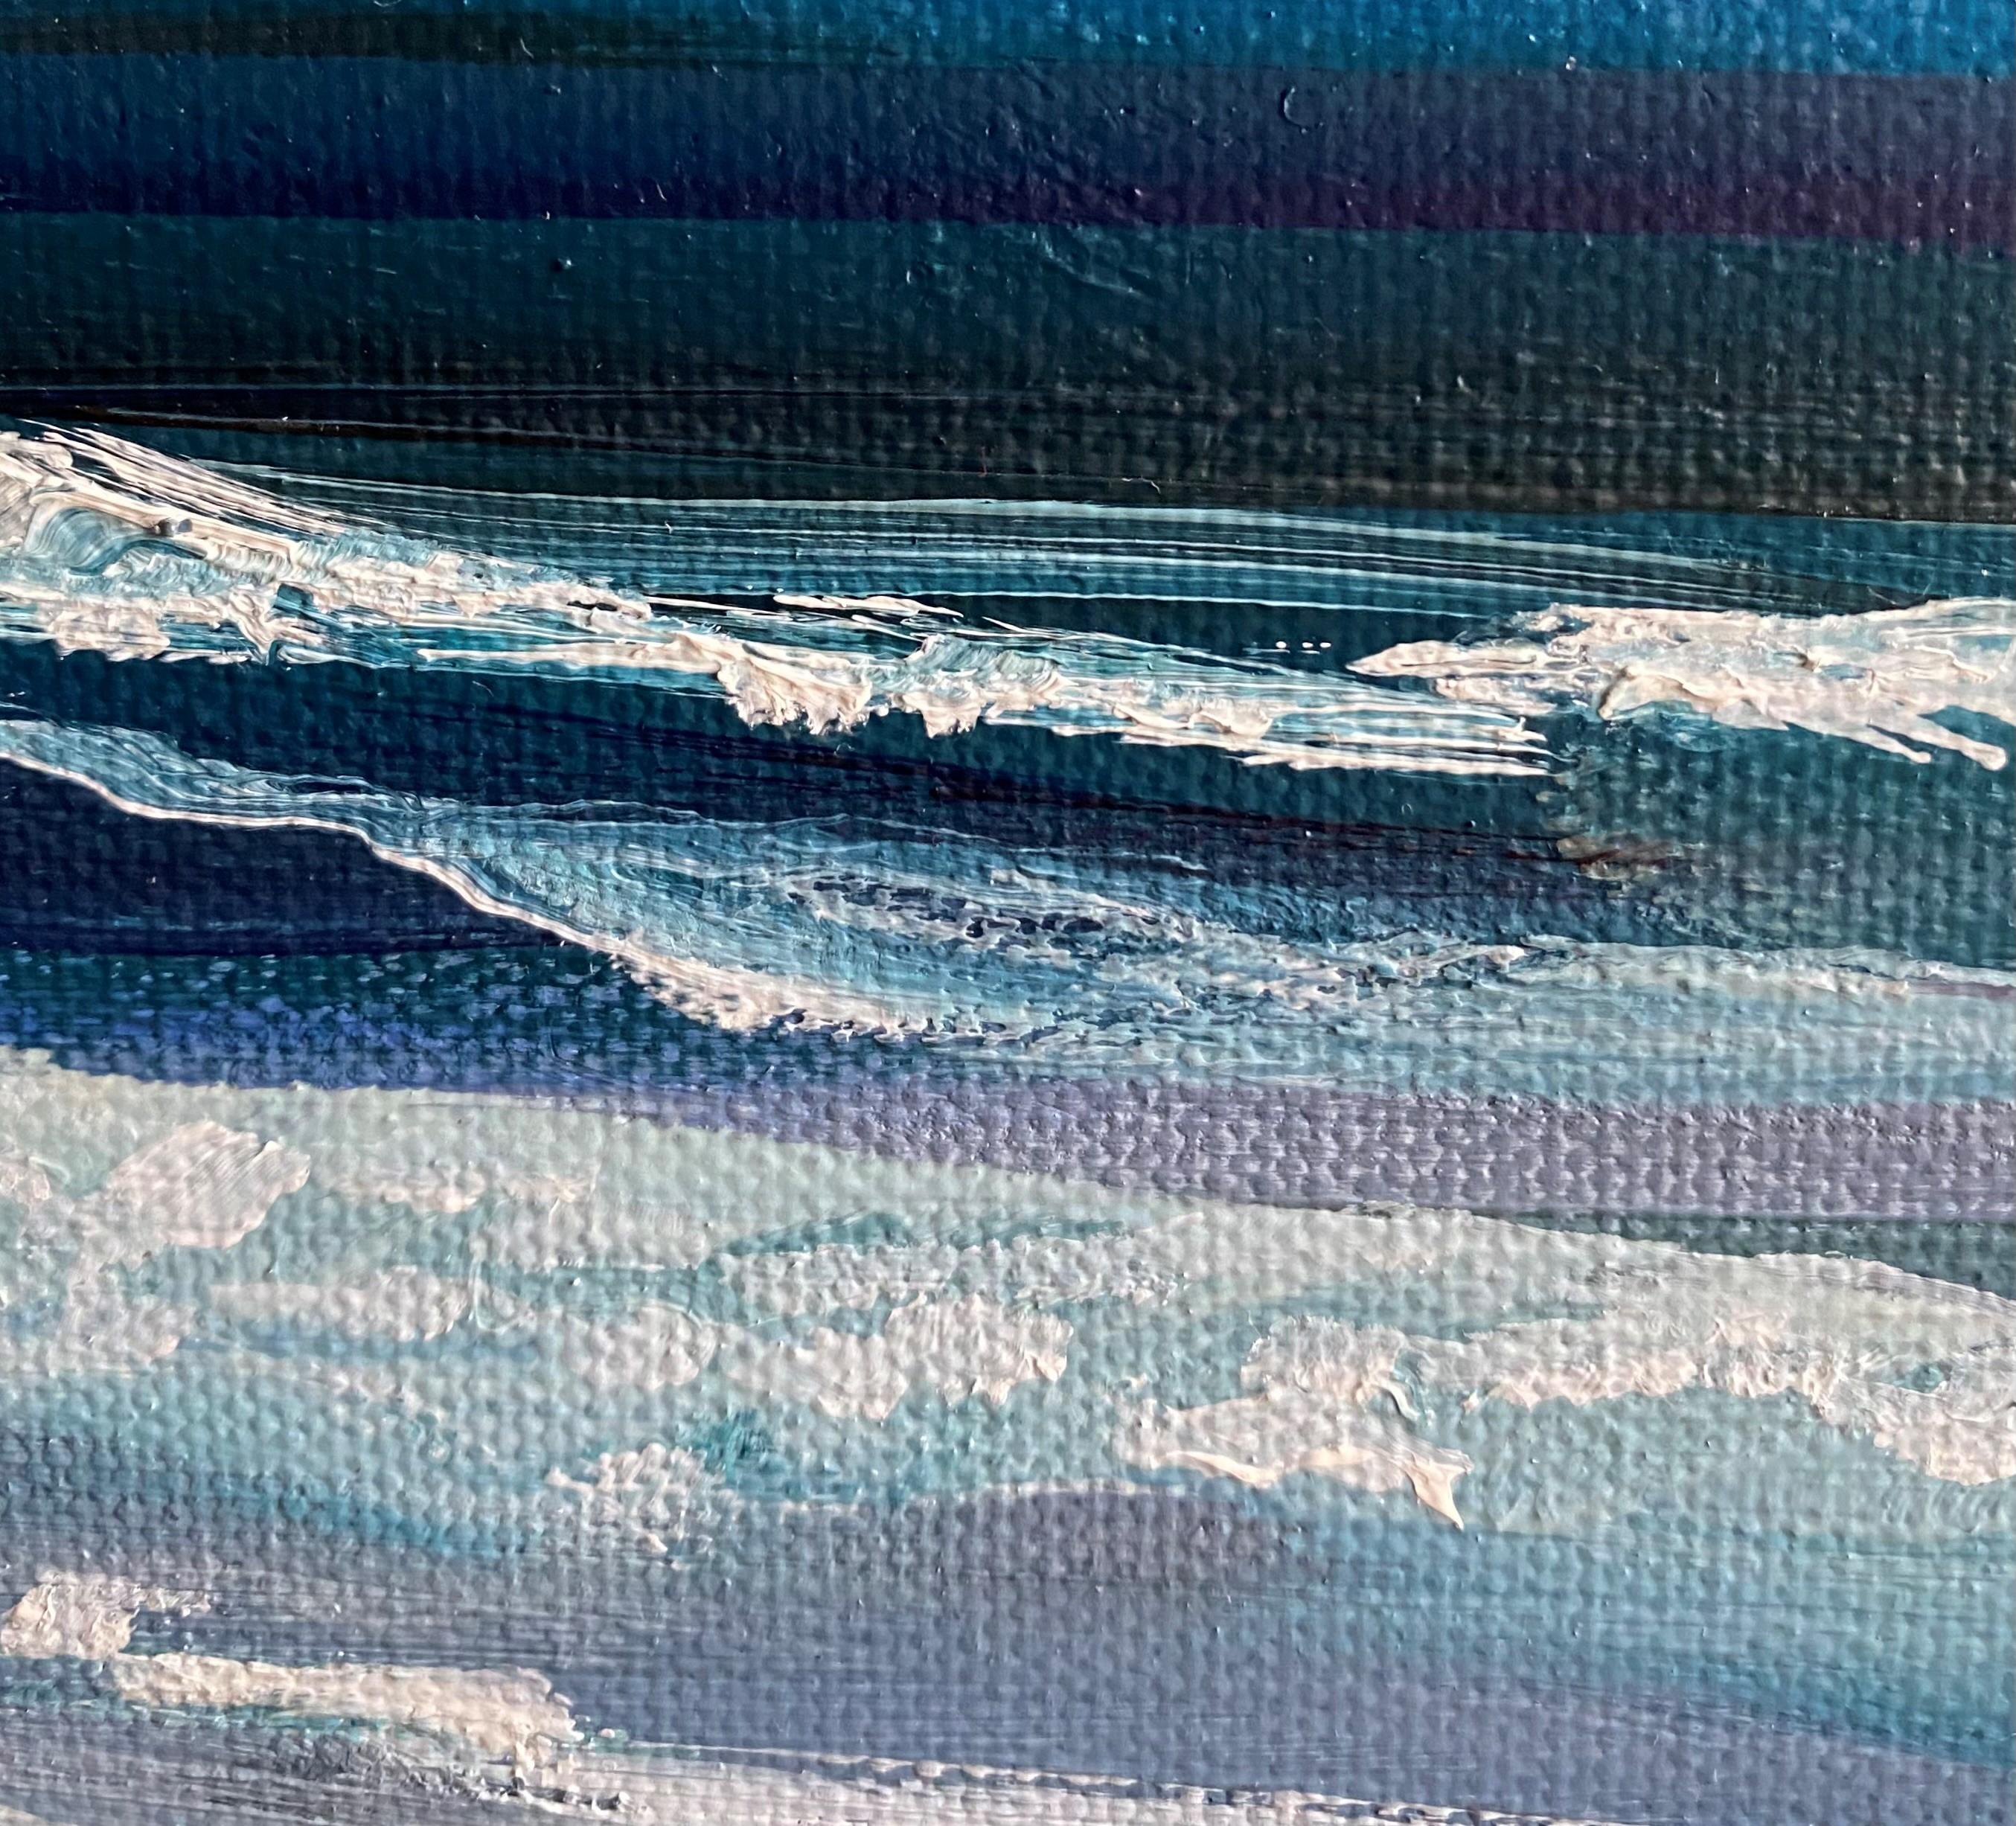 <p>Artist Comments<br>Heavy storm clouds and wind roll over the dark waves, tossing them into higher crests in this dramatic painting by artist Kristine Kainer. Ethereal horizons bring a sense of mystery and excitement. With harmonious colors and